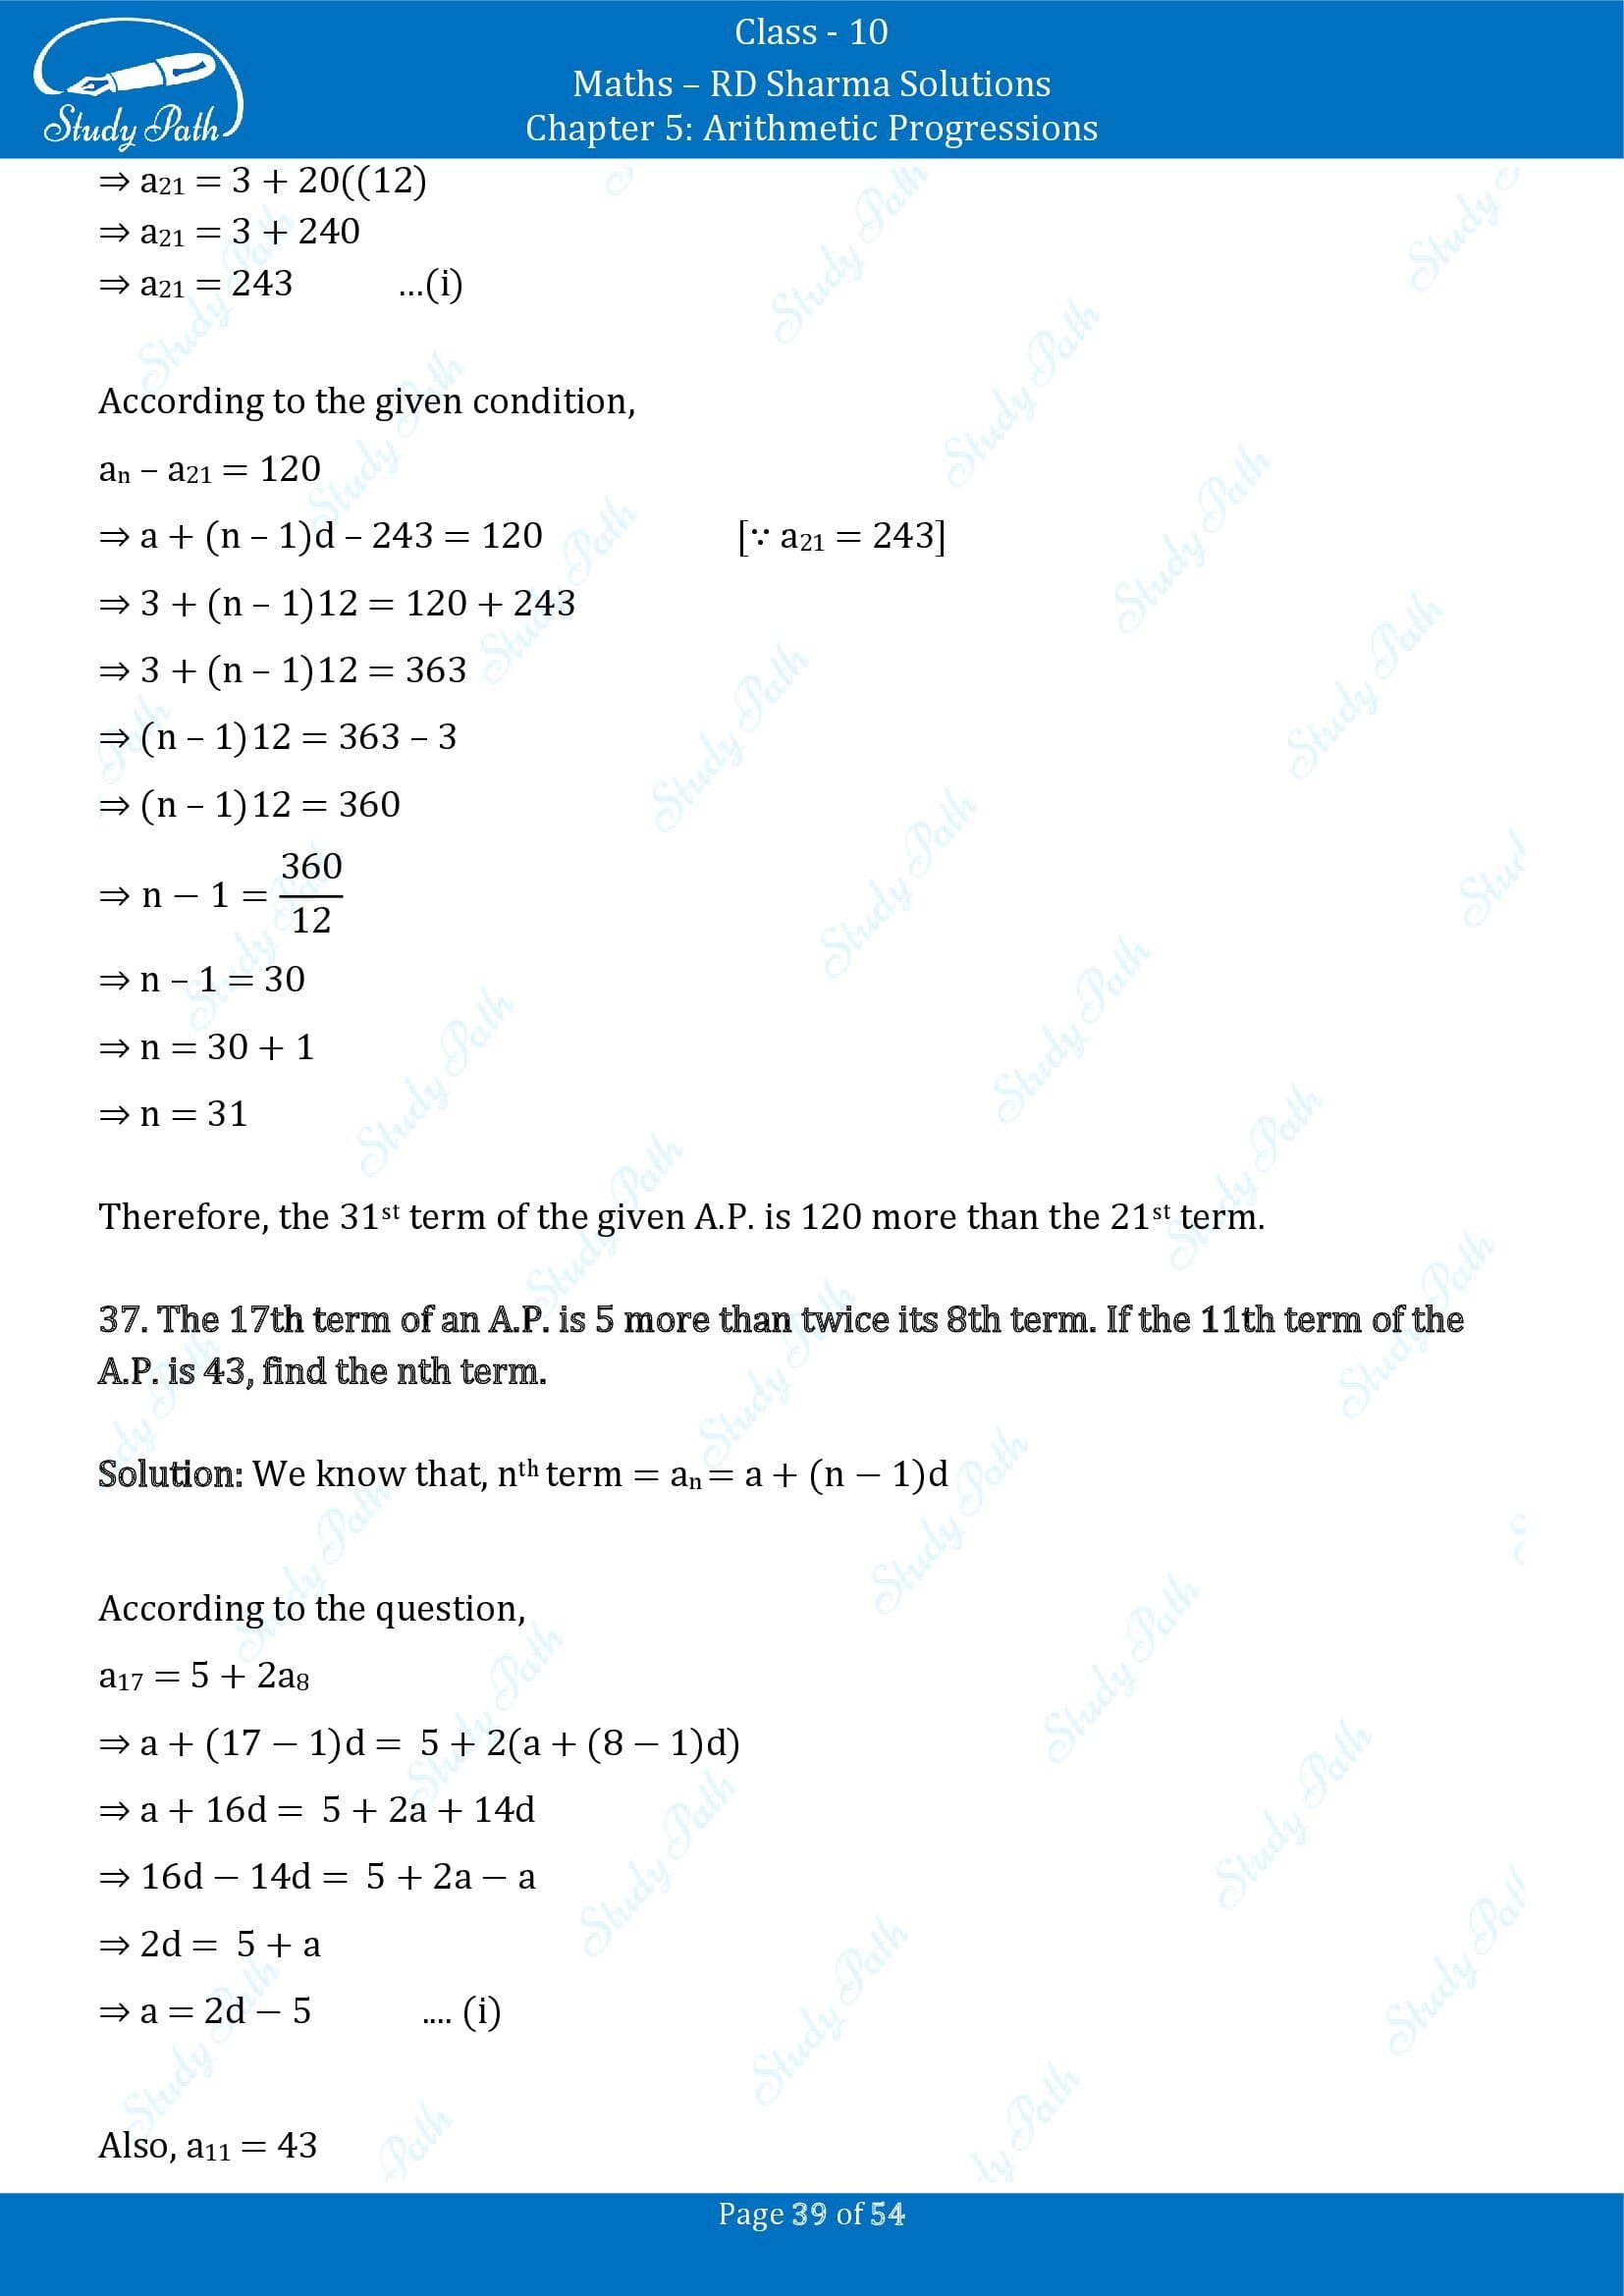 RD Sharma Solutions Class 10 Chapter 5 Arithmetic Progressions Exercise 5.4 00039